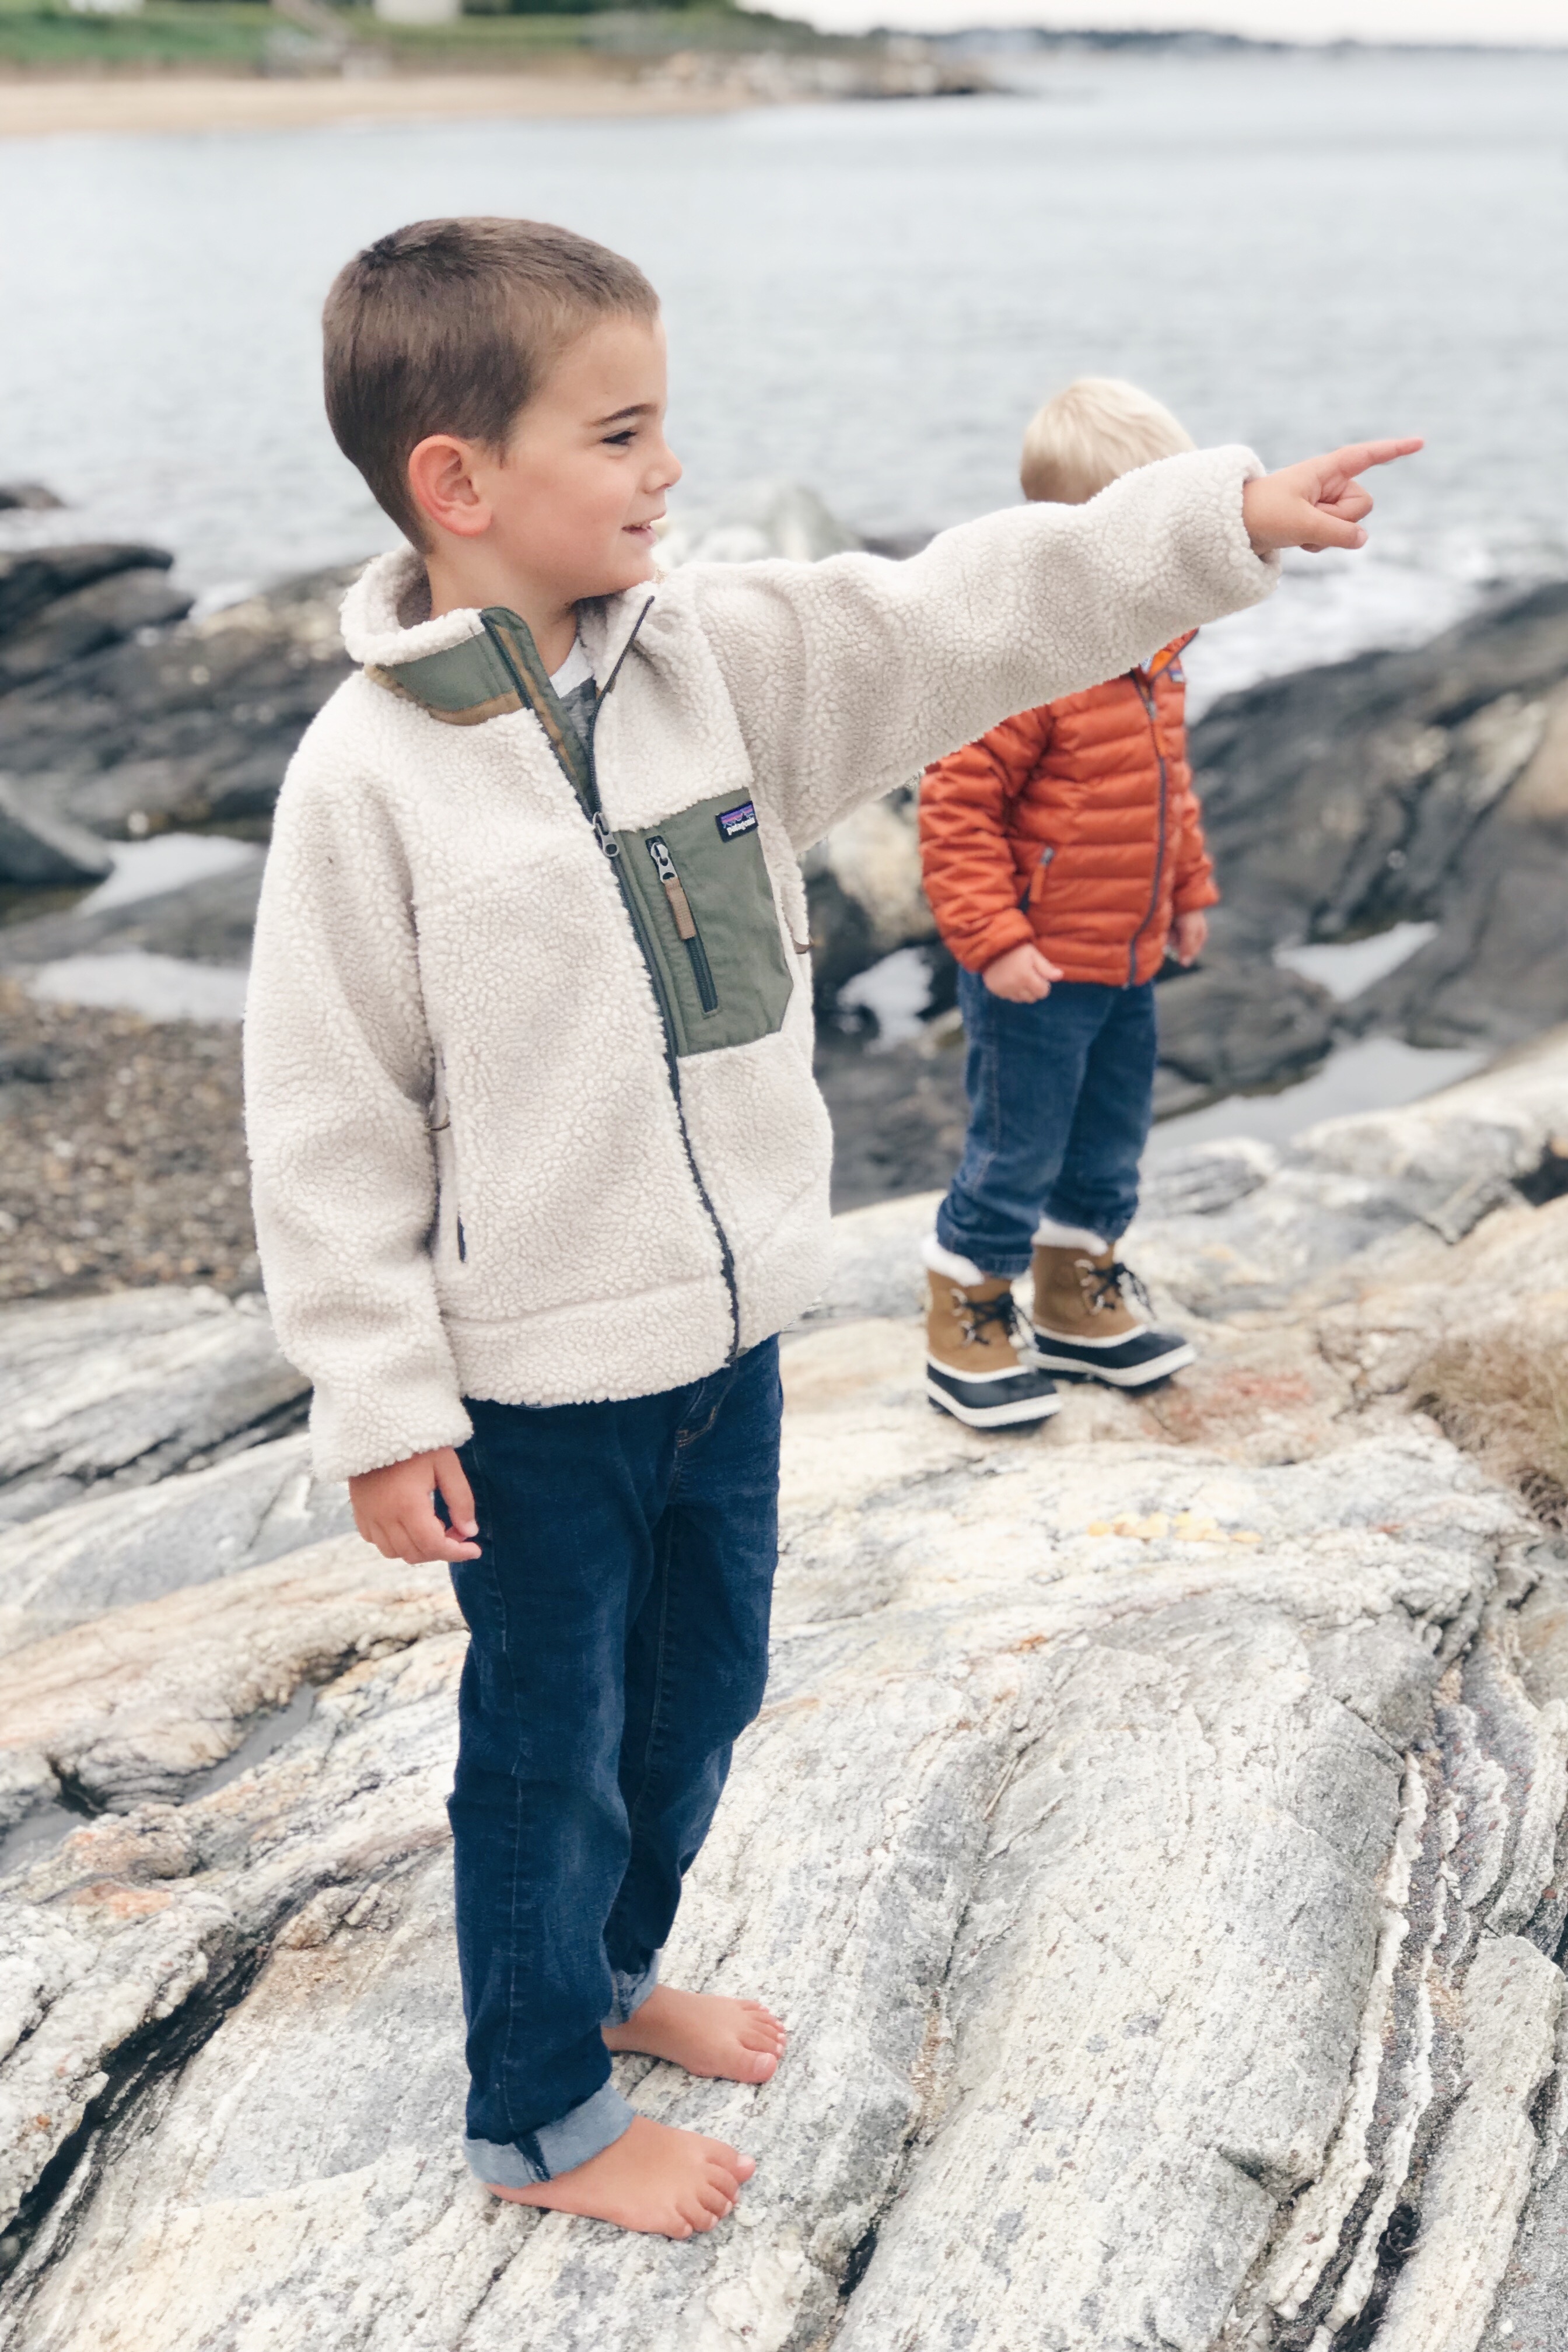 Fall Bucket list for families - young boy at beach in Patagonia jacket